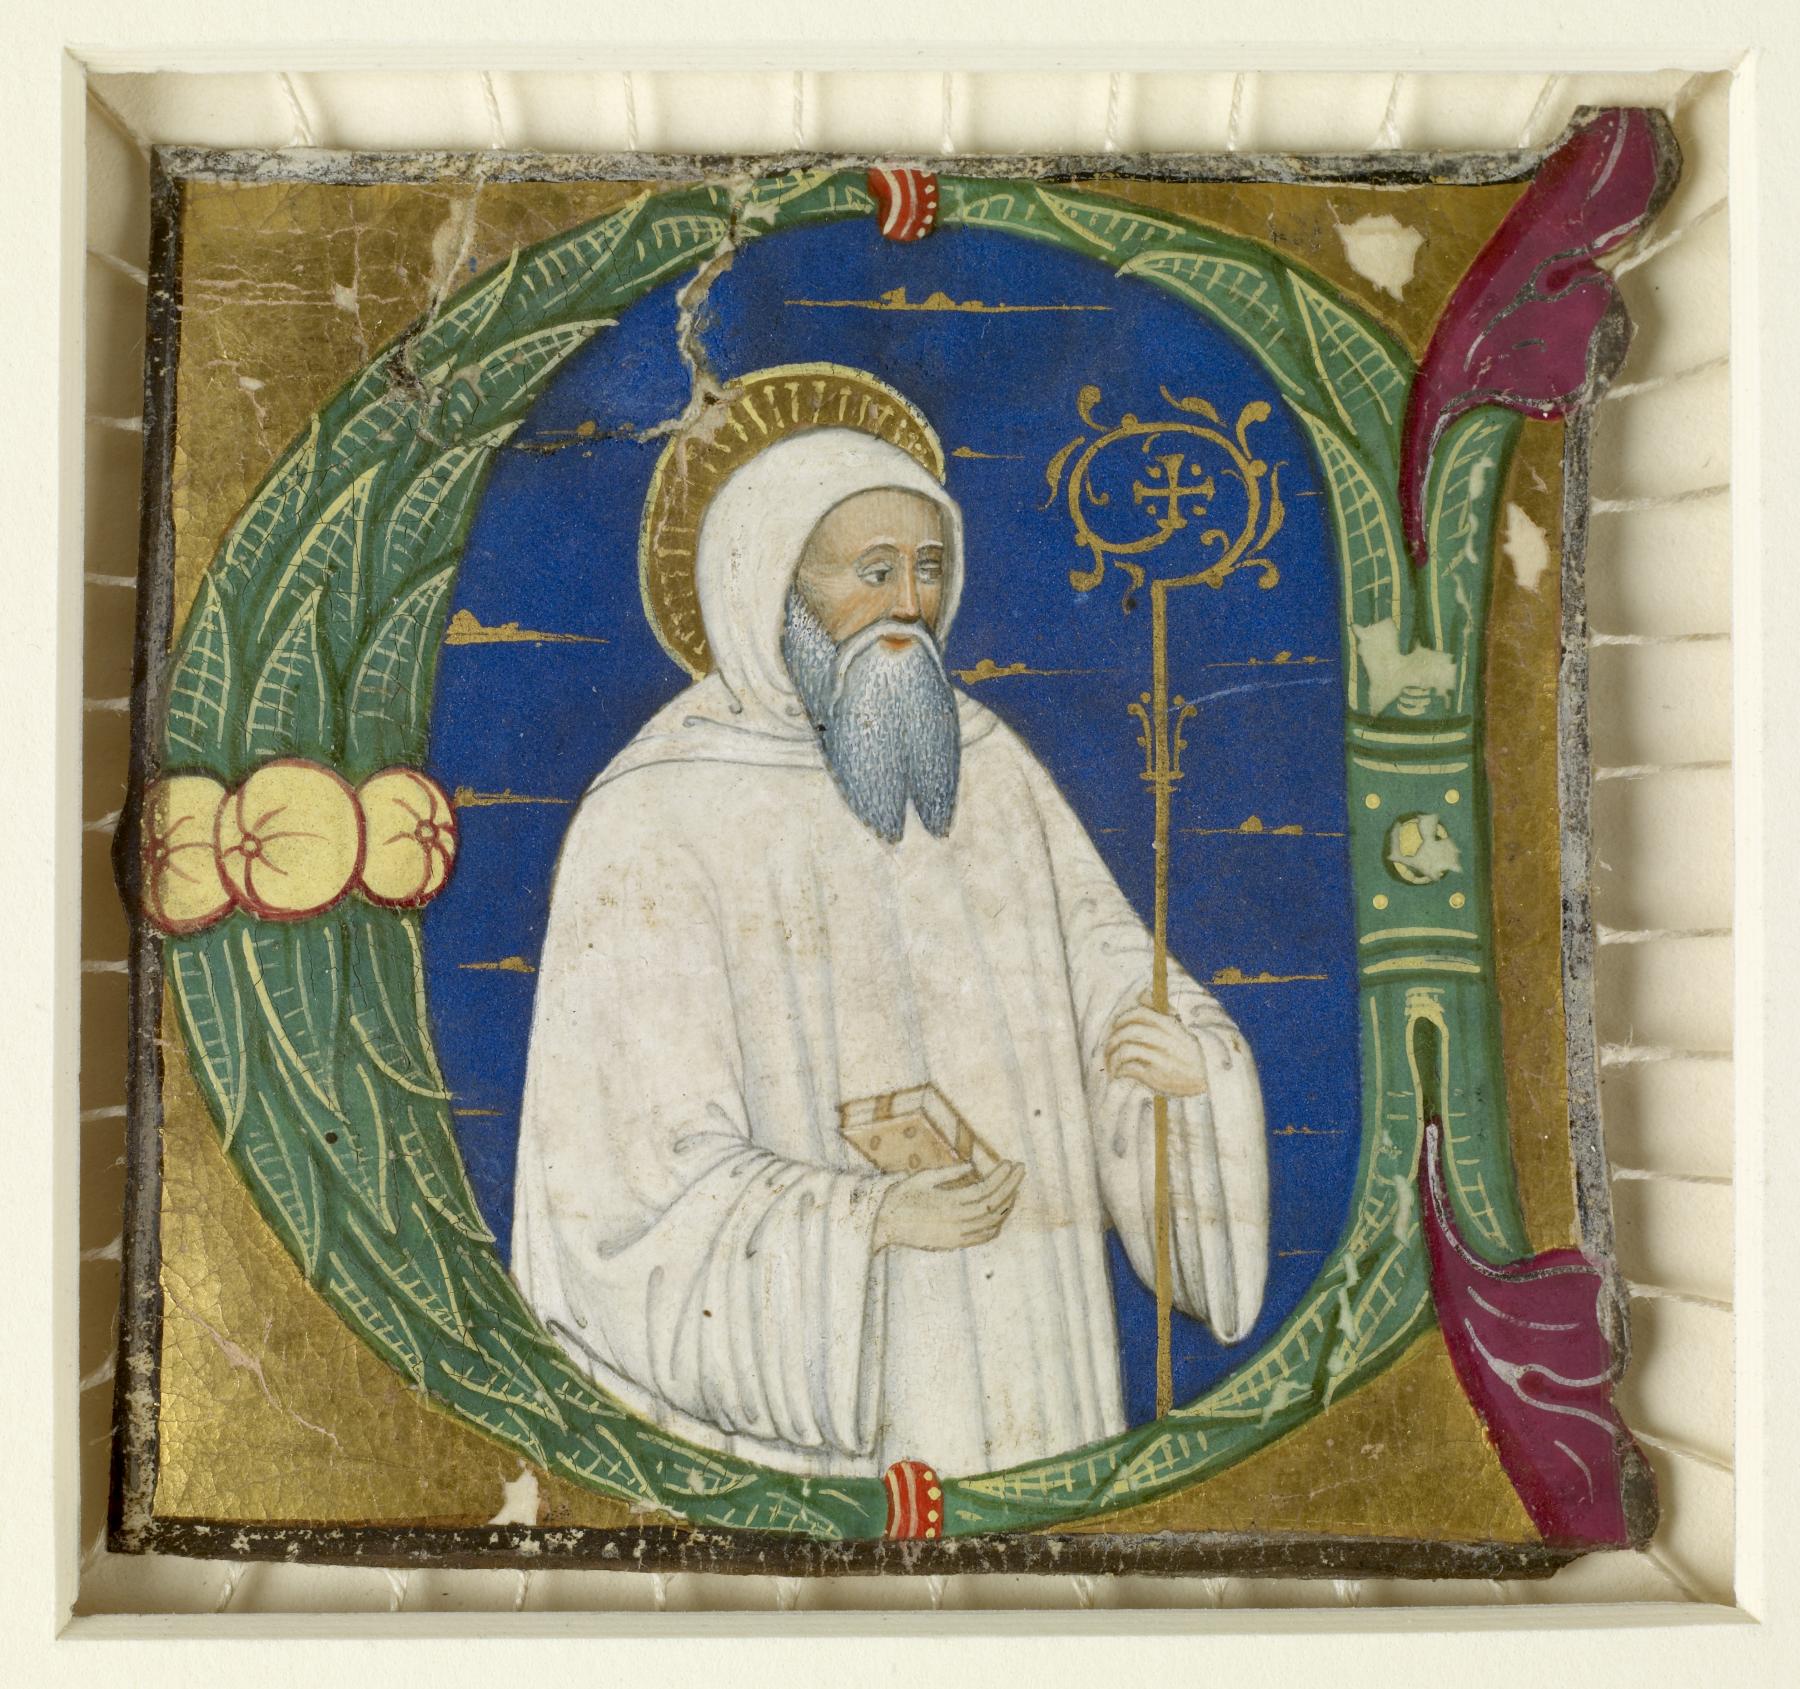 Image for Initial C Cutting (Initial C [?] with Saint Bernard)